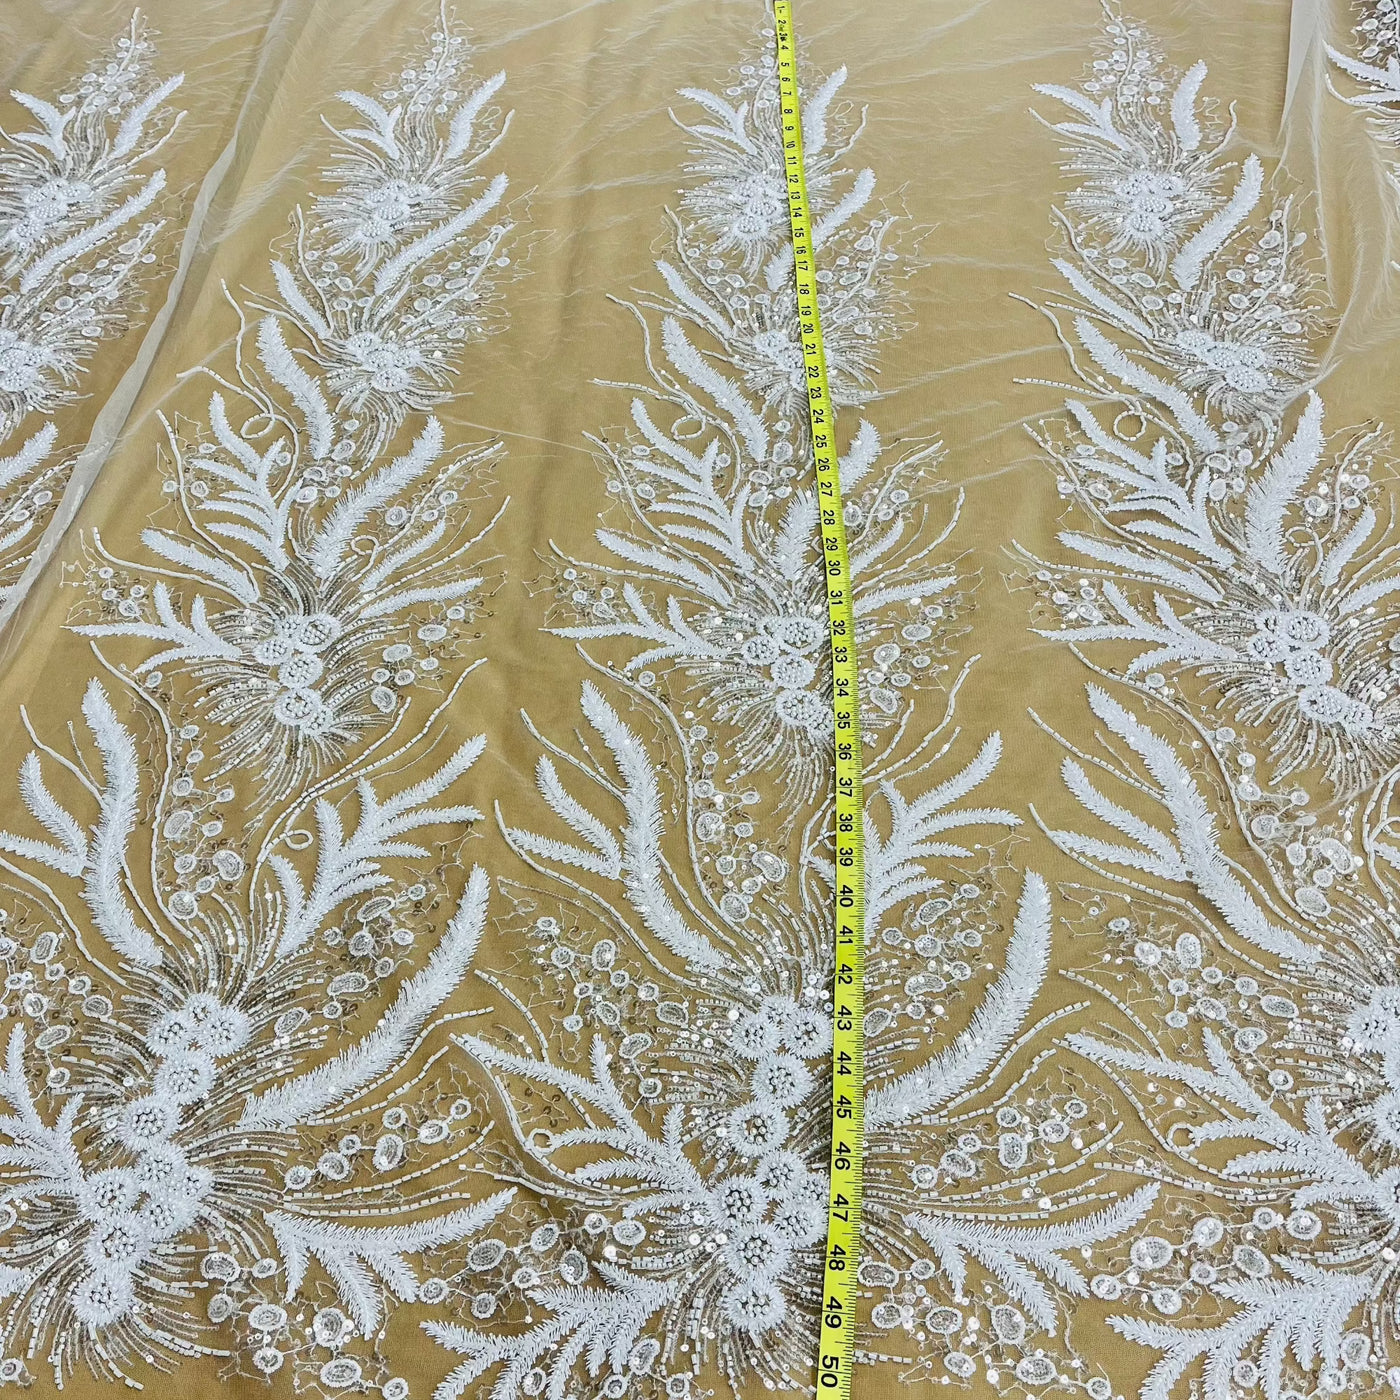 Beaded Lace Fabric Embroidered on 100% Polyester Net Mesh | Lace USA - GD-220712 White